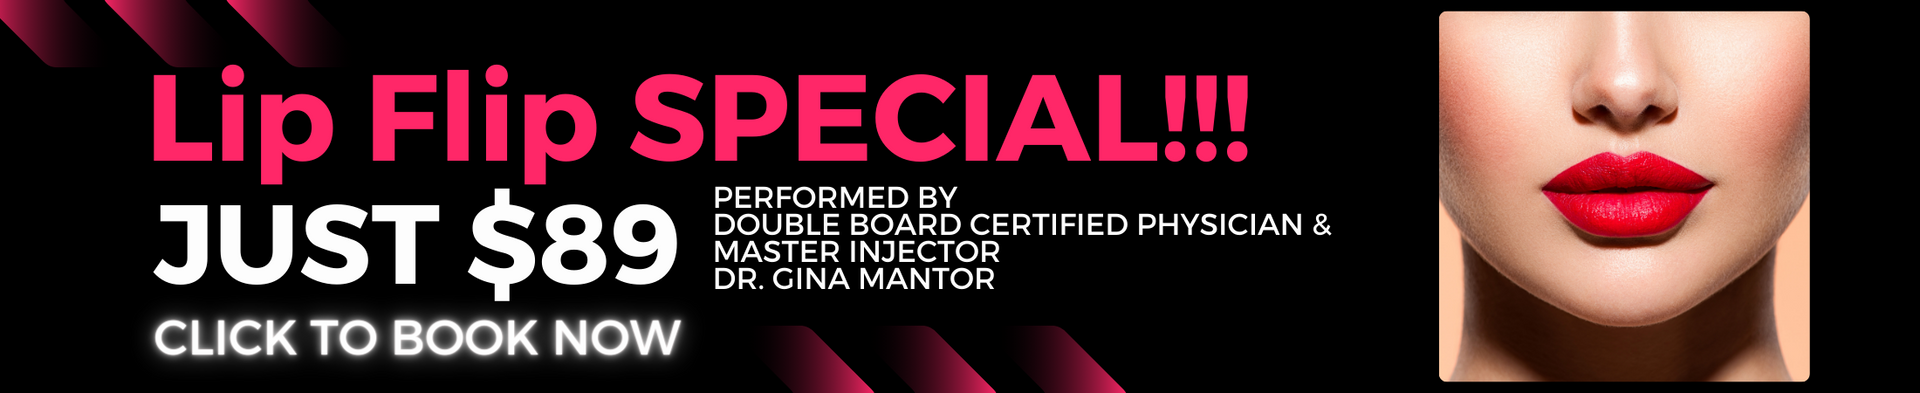 Lip Flip Special, Just $89 - Dr. Gina Mantor, Physician Injector